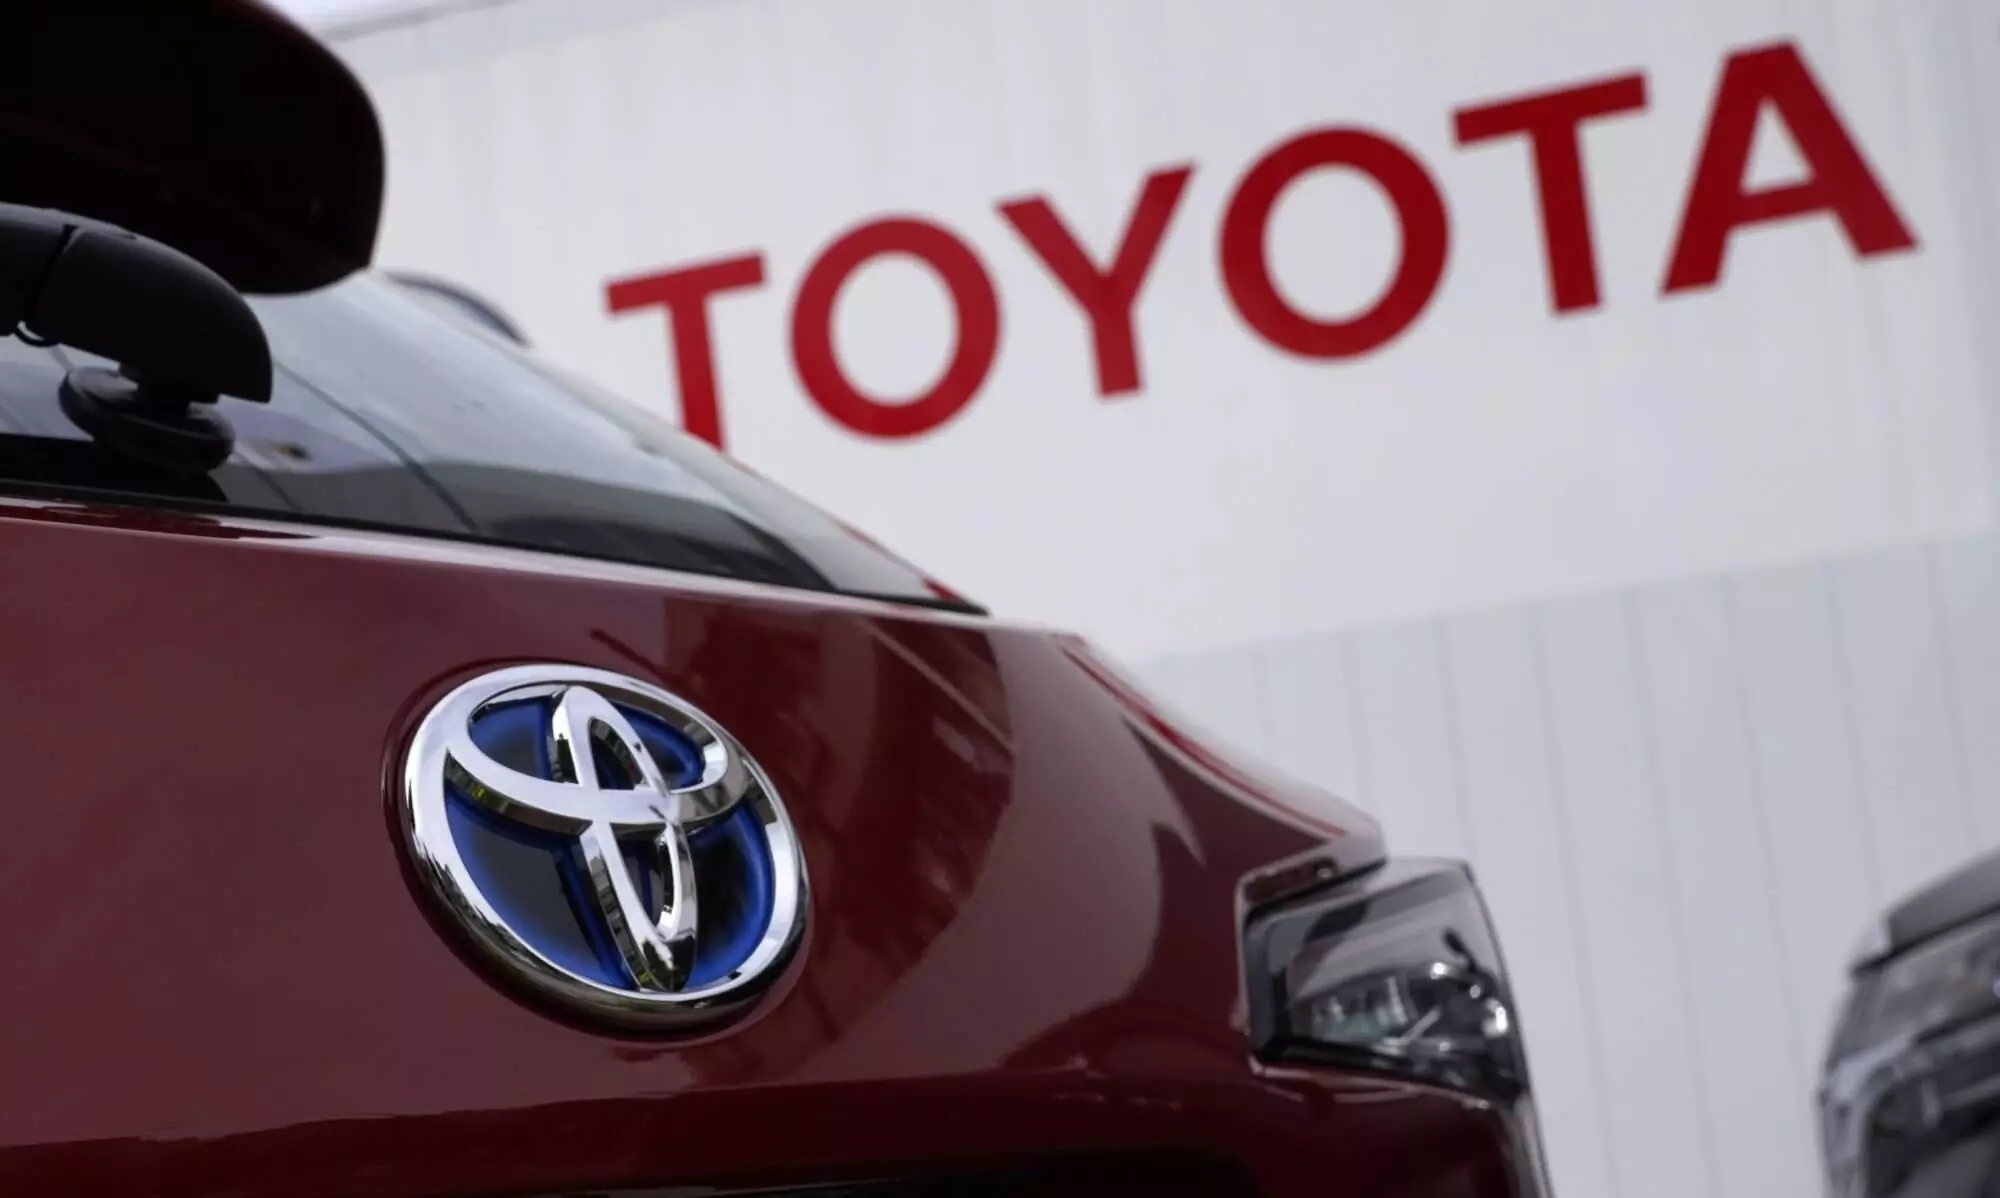 Toyota cuts its November production by 15% due to parts shortage